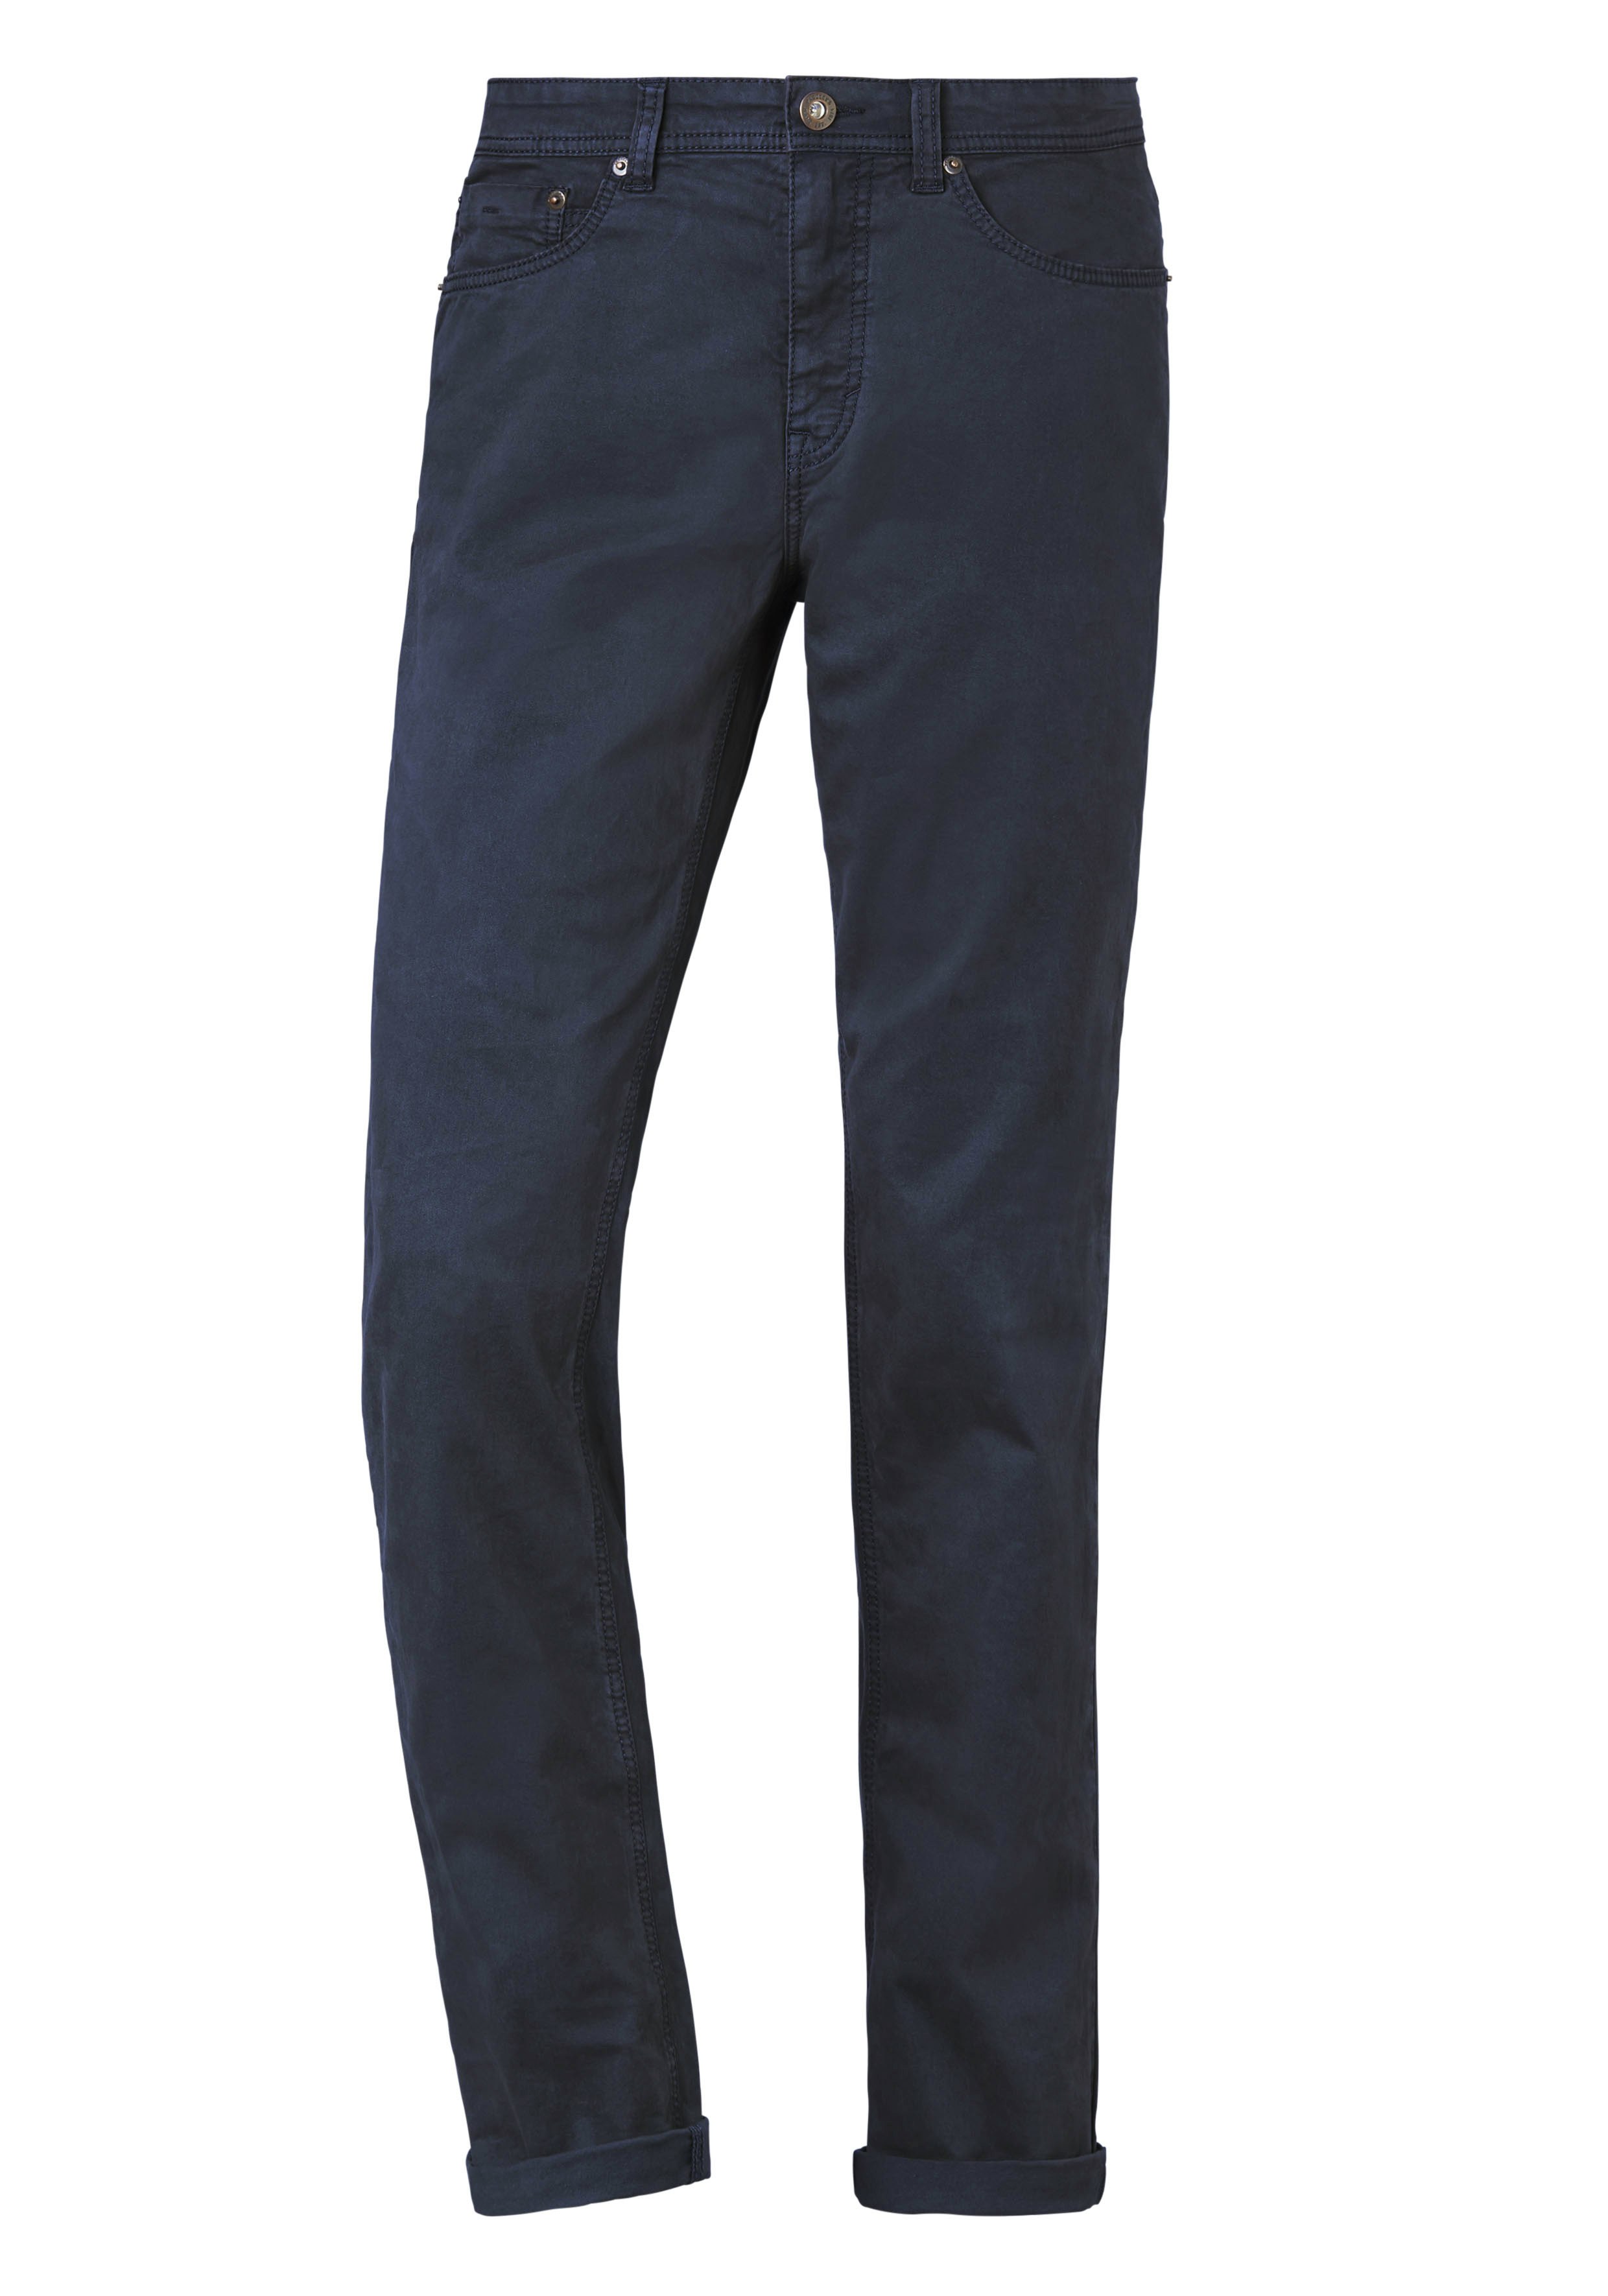 Paddock's Jeans Ranger Colored navy